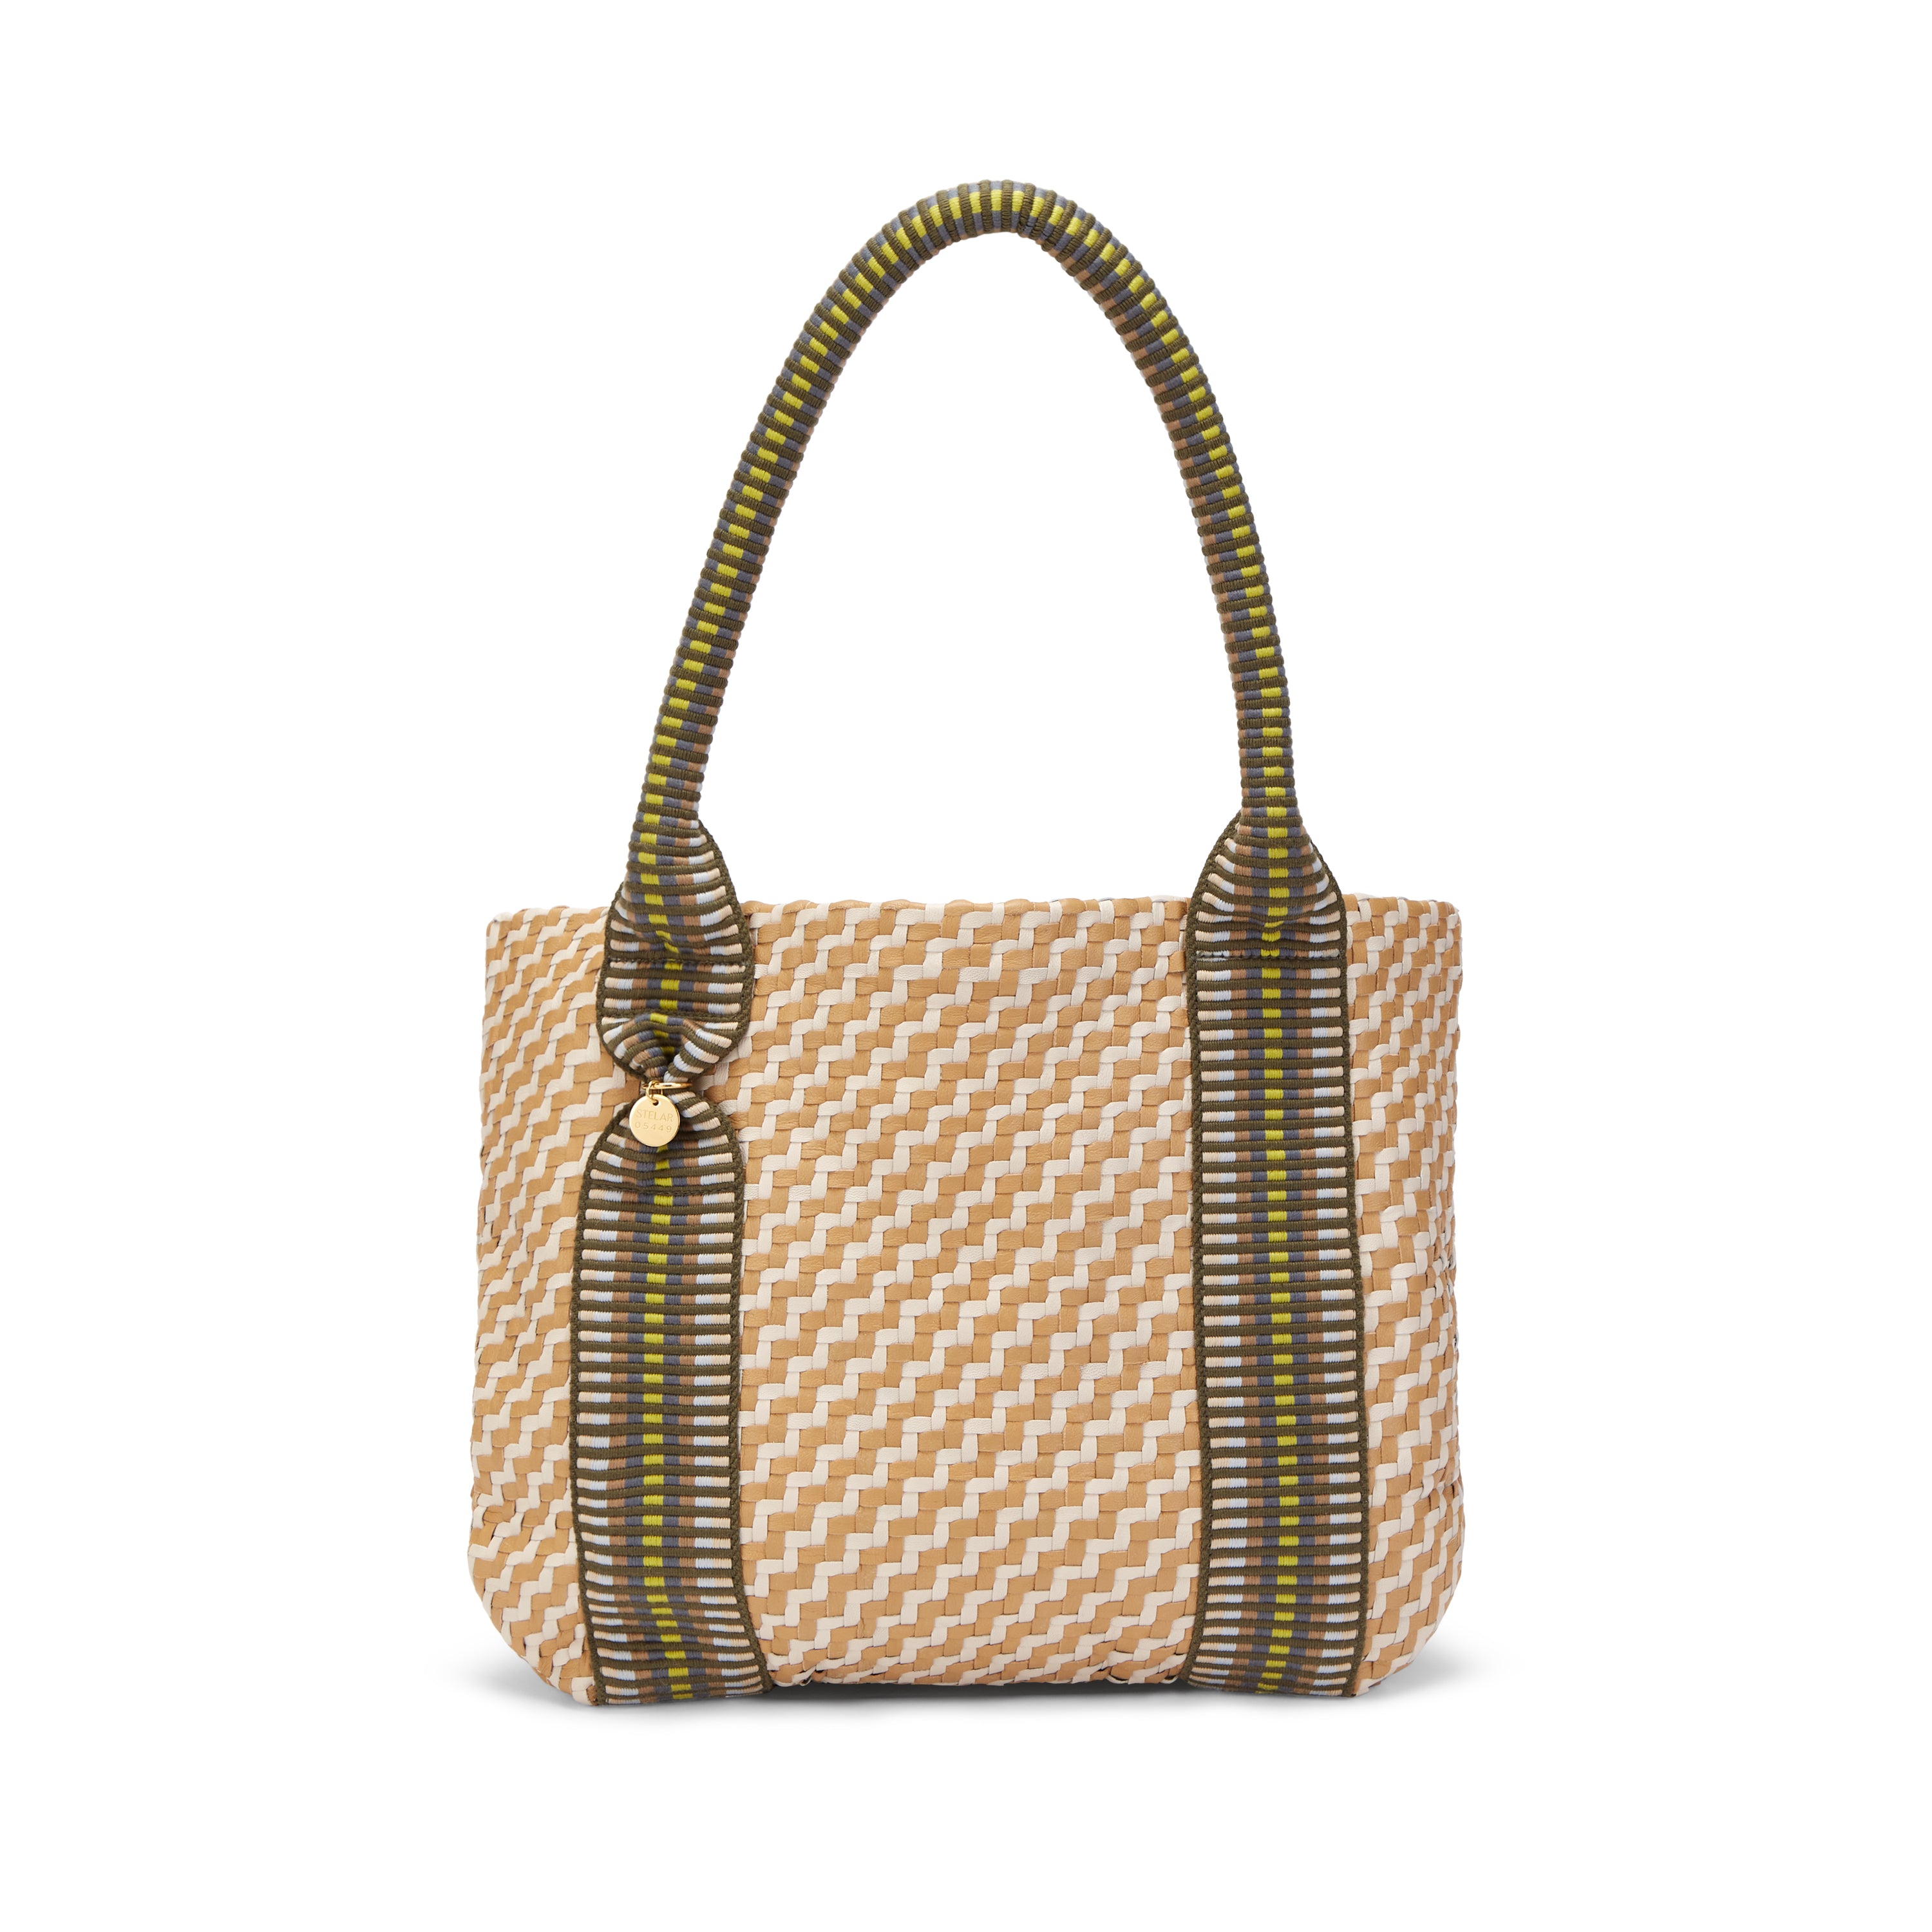 Misool Hand Woven Small Leather Tote Bag in Latte by STELAR